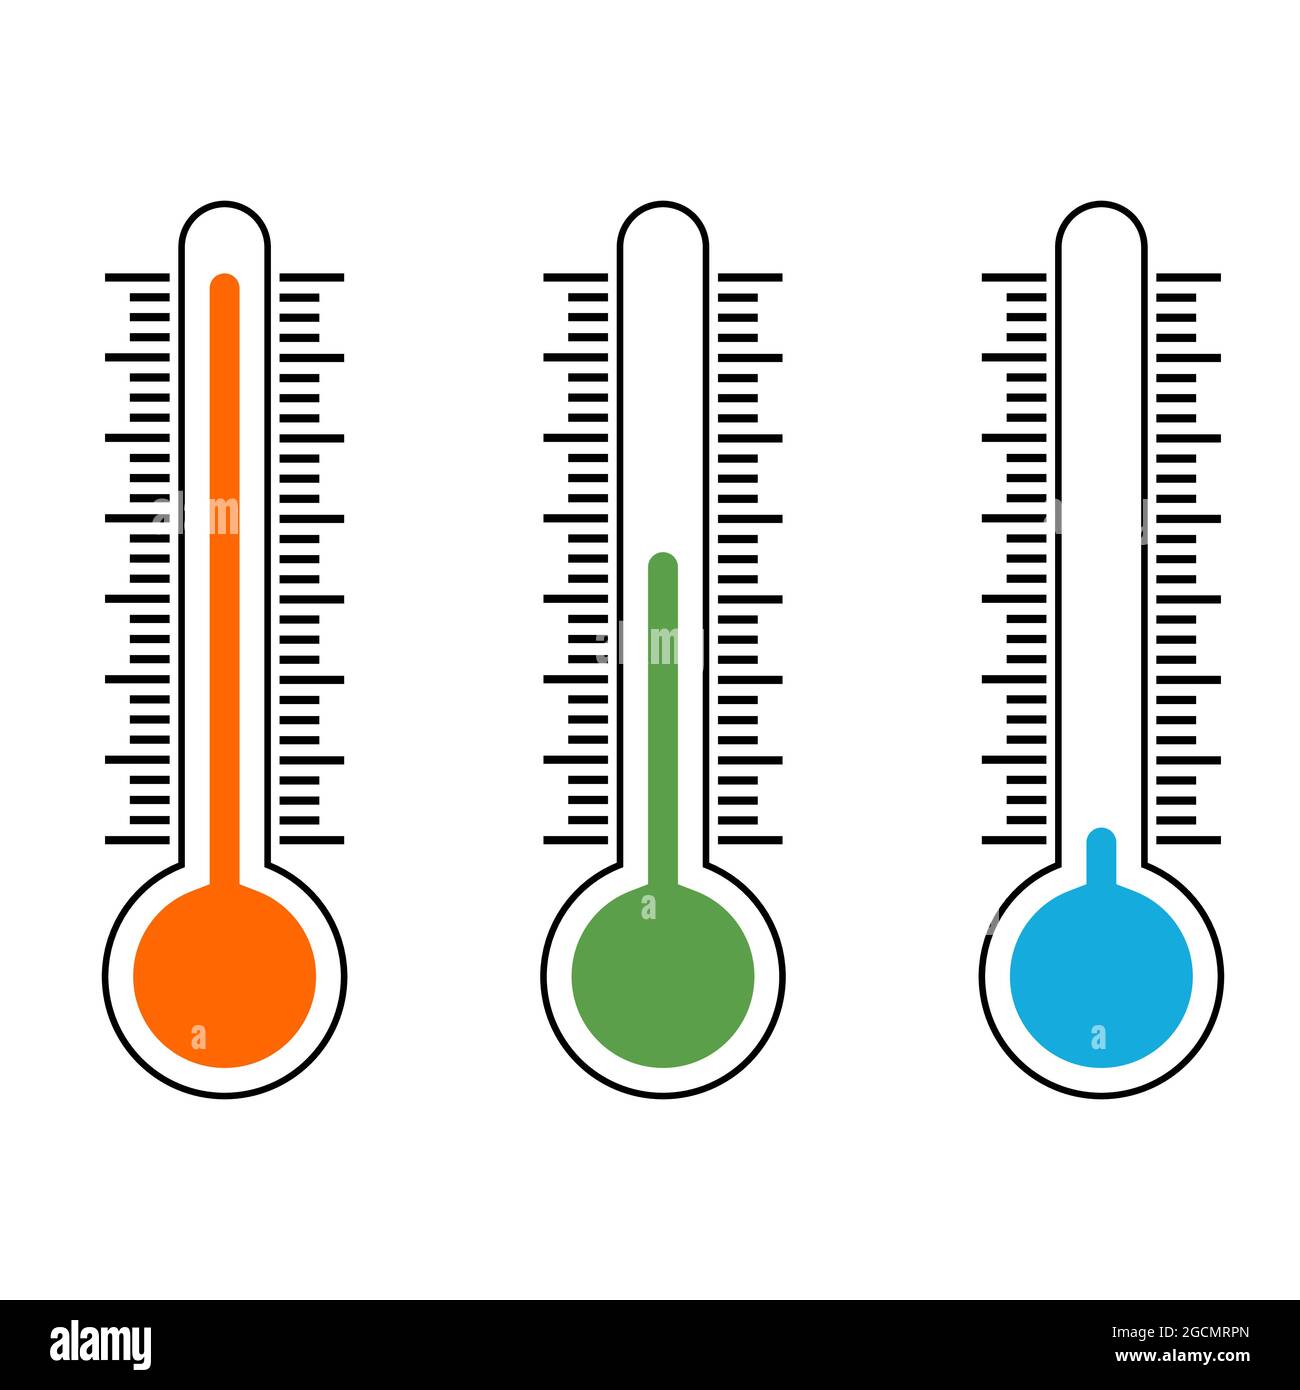 https://c8.alamy.com/comp/2GCMRPN/thermometer-icons-showing-the-temperature-warm-cold-comfortable-vector-sign-temperature-symbol-2GCMRPN.jpg